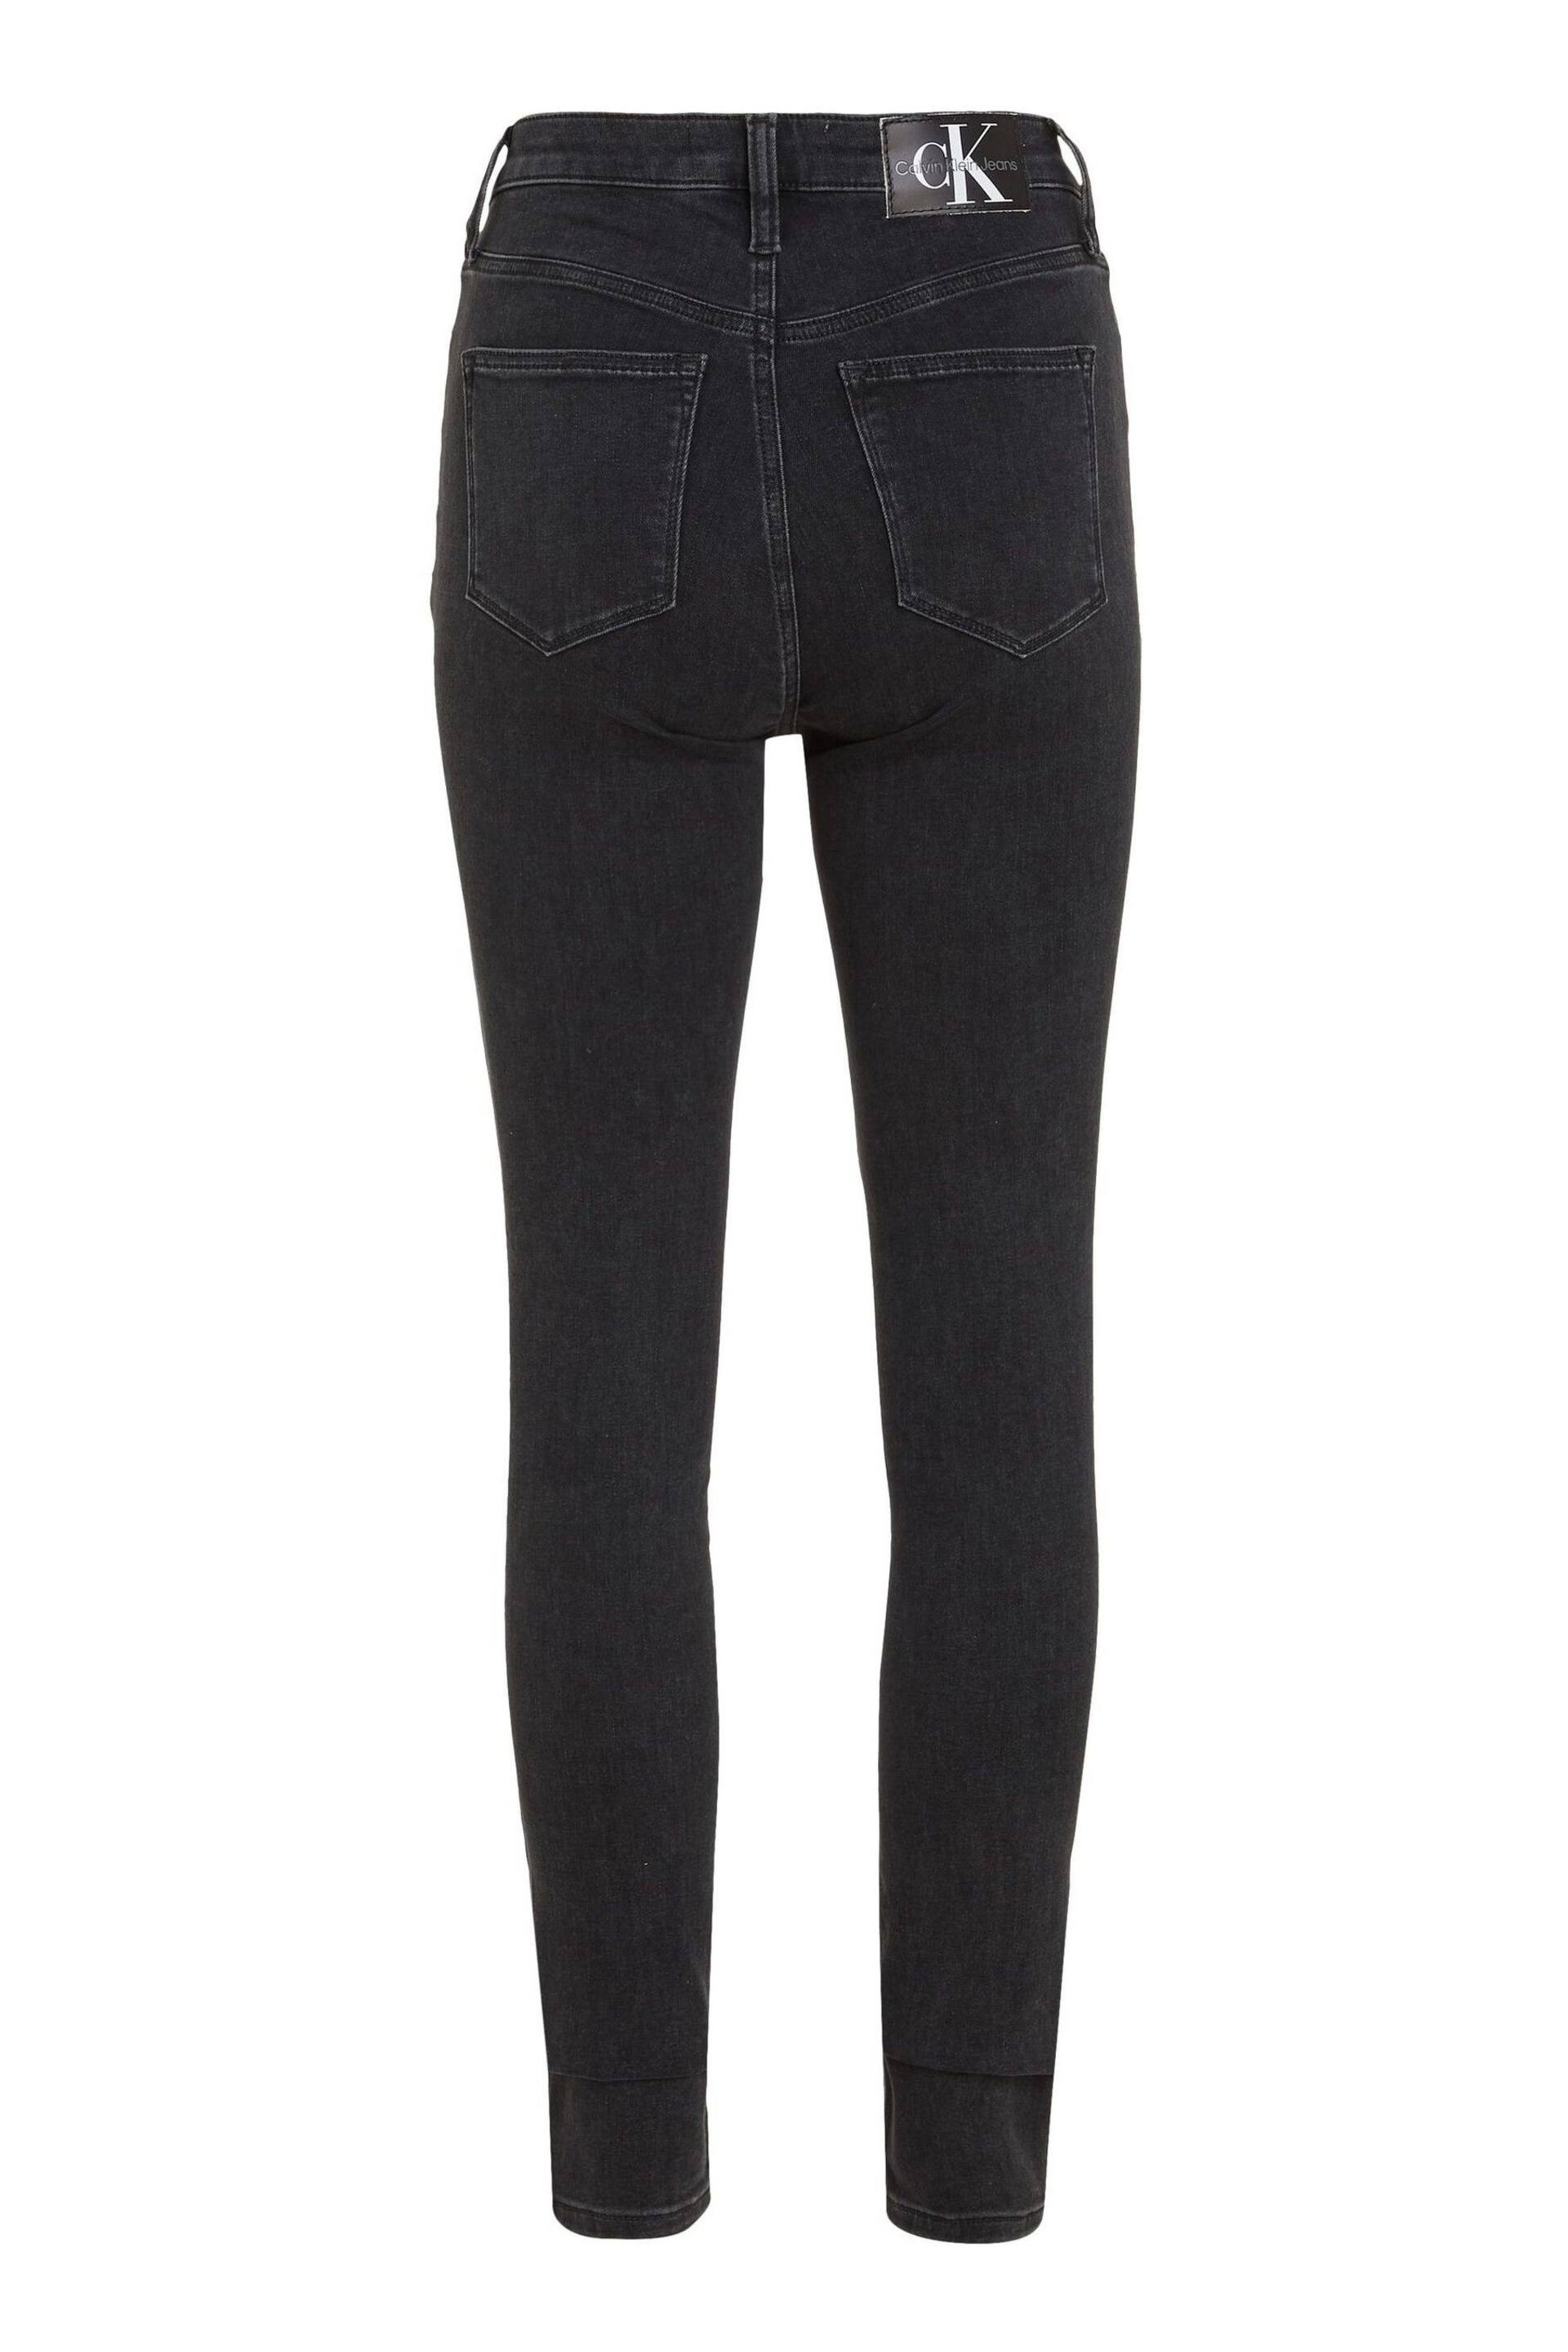 Calvin Klein Jeans High Rise Skinny Jeans - Image 5 of 6